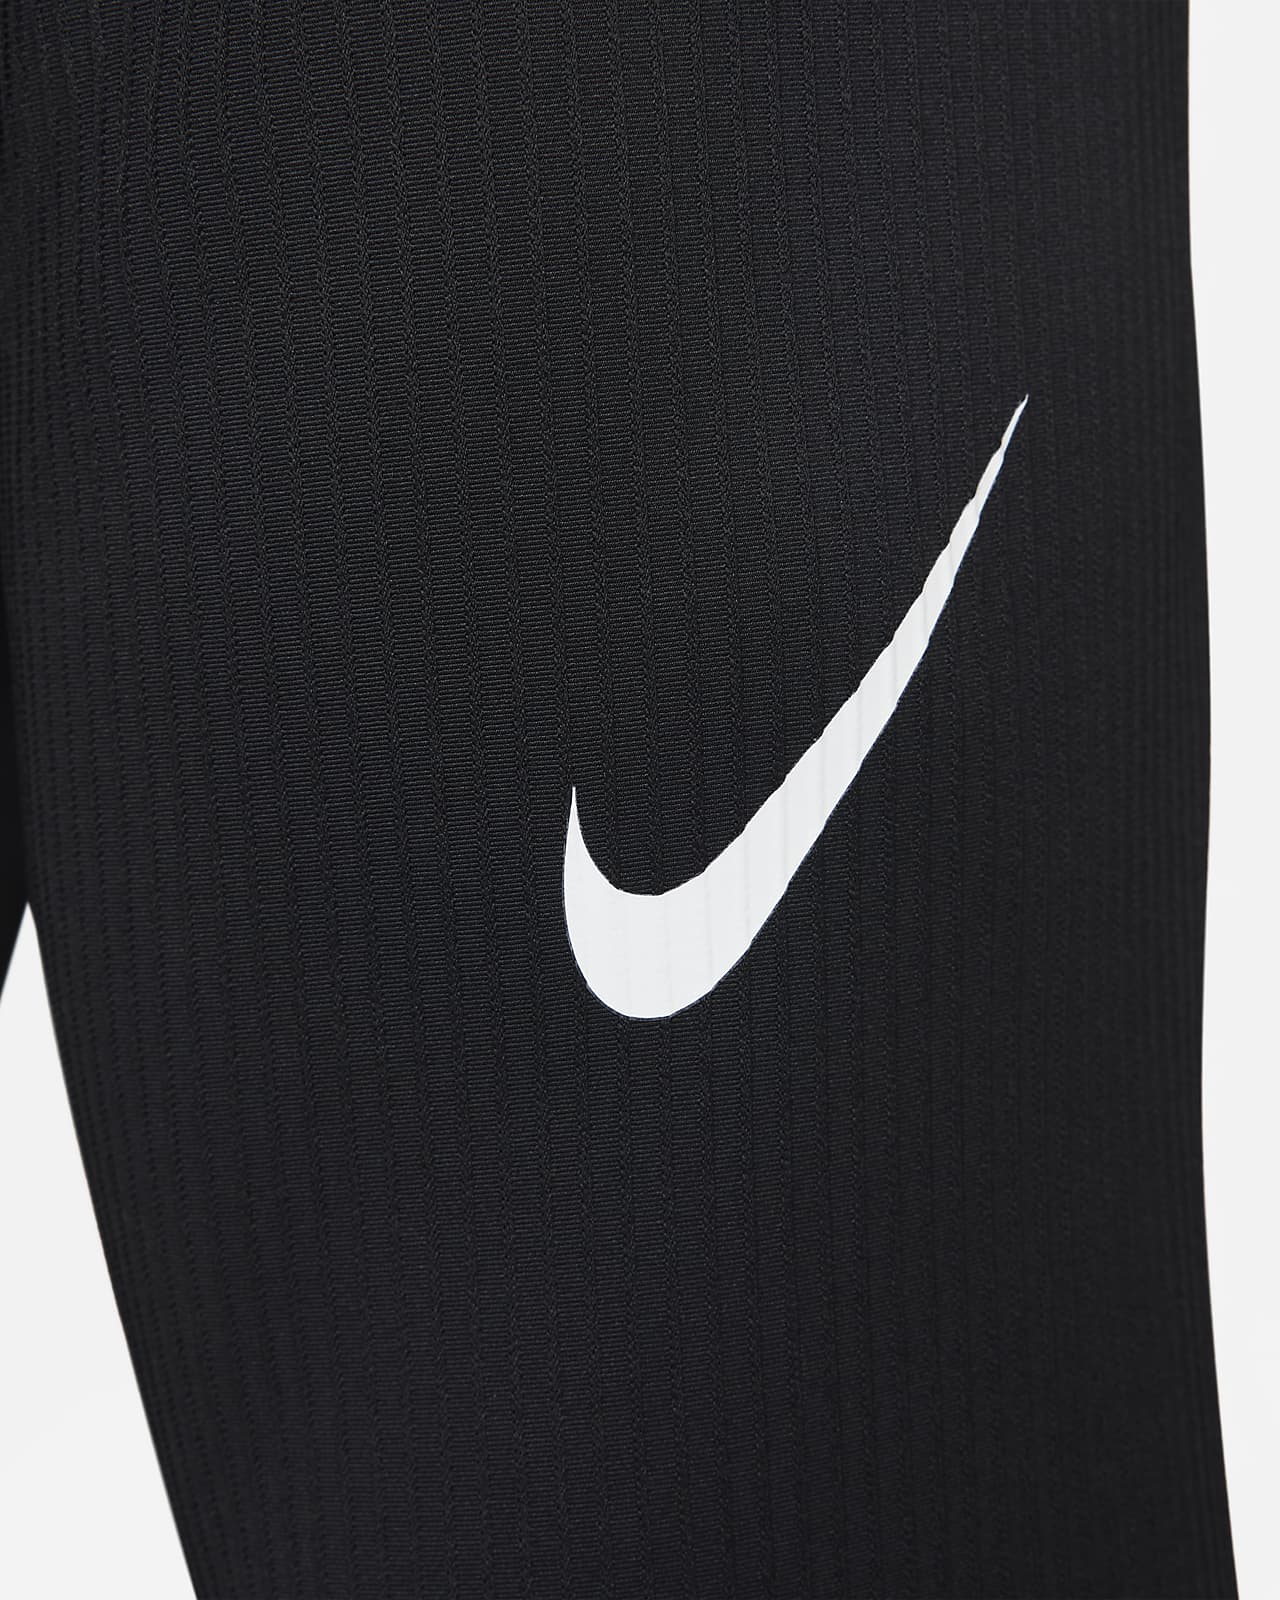 Best price for NIKE Dri-FIT ADV AeroSwift Tight (Tights and